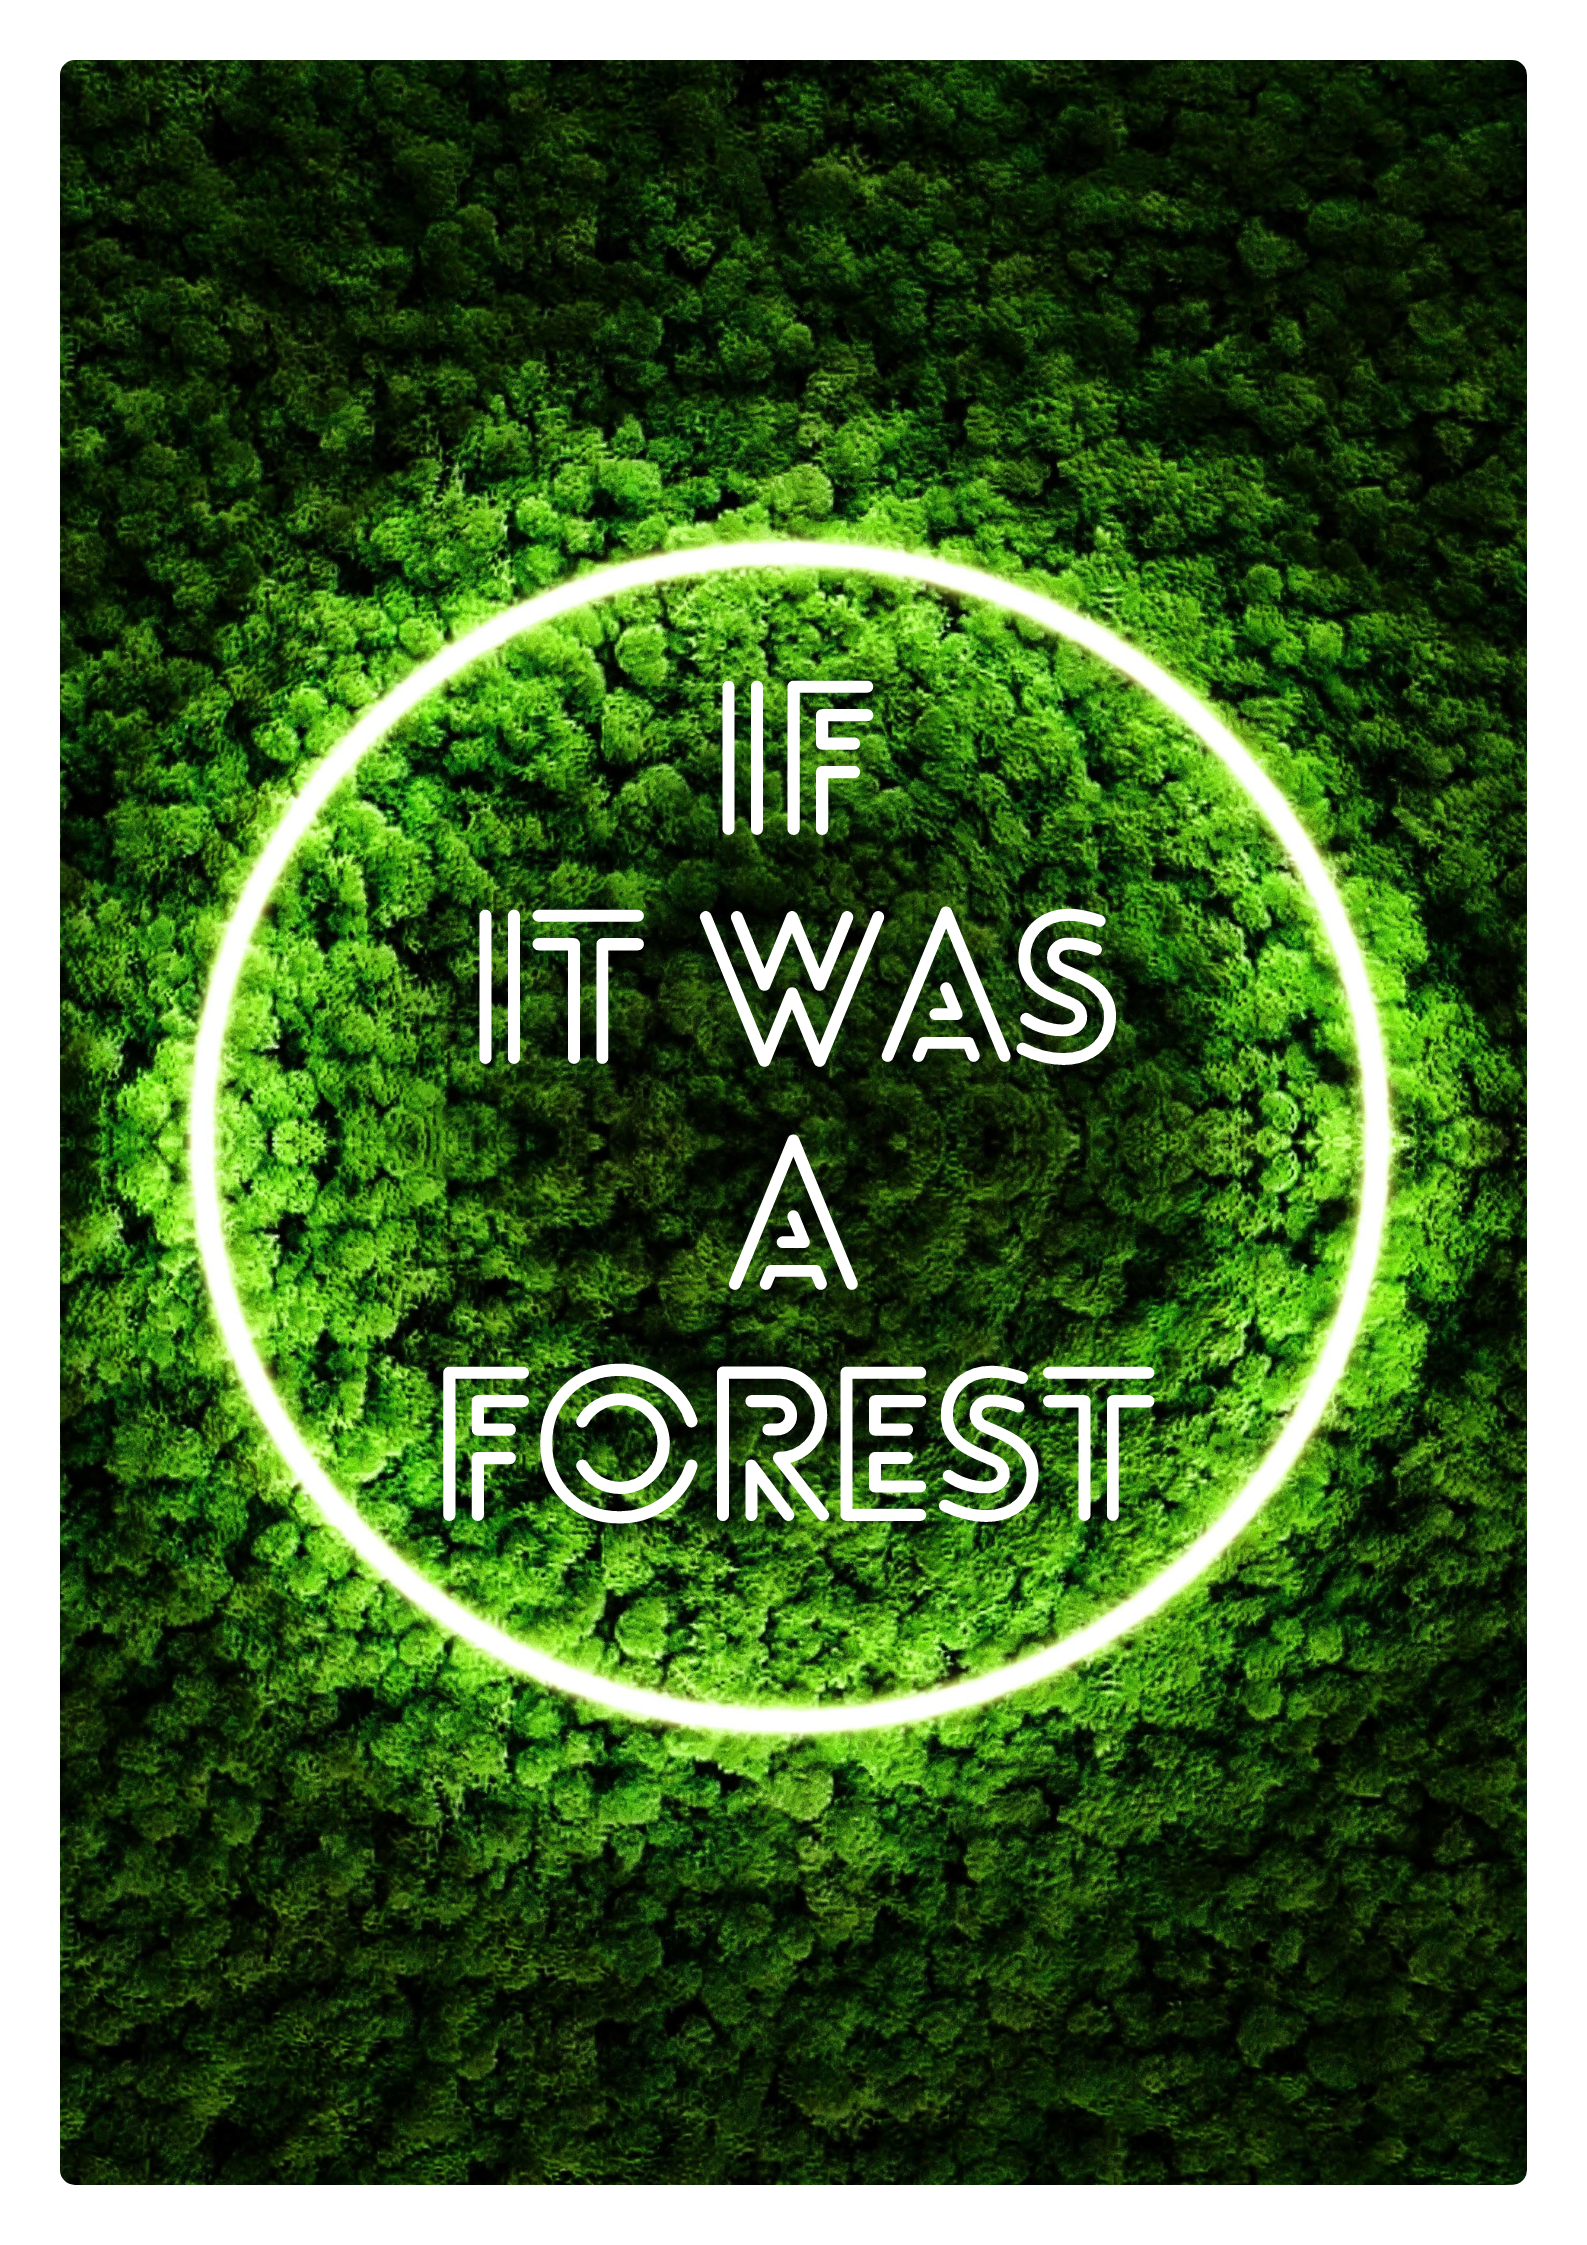 If it was a forest